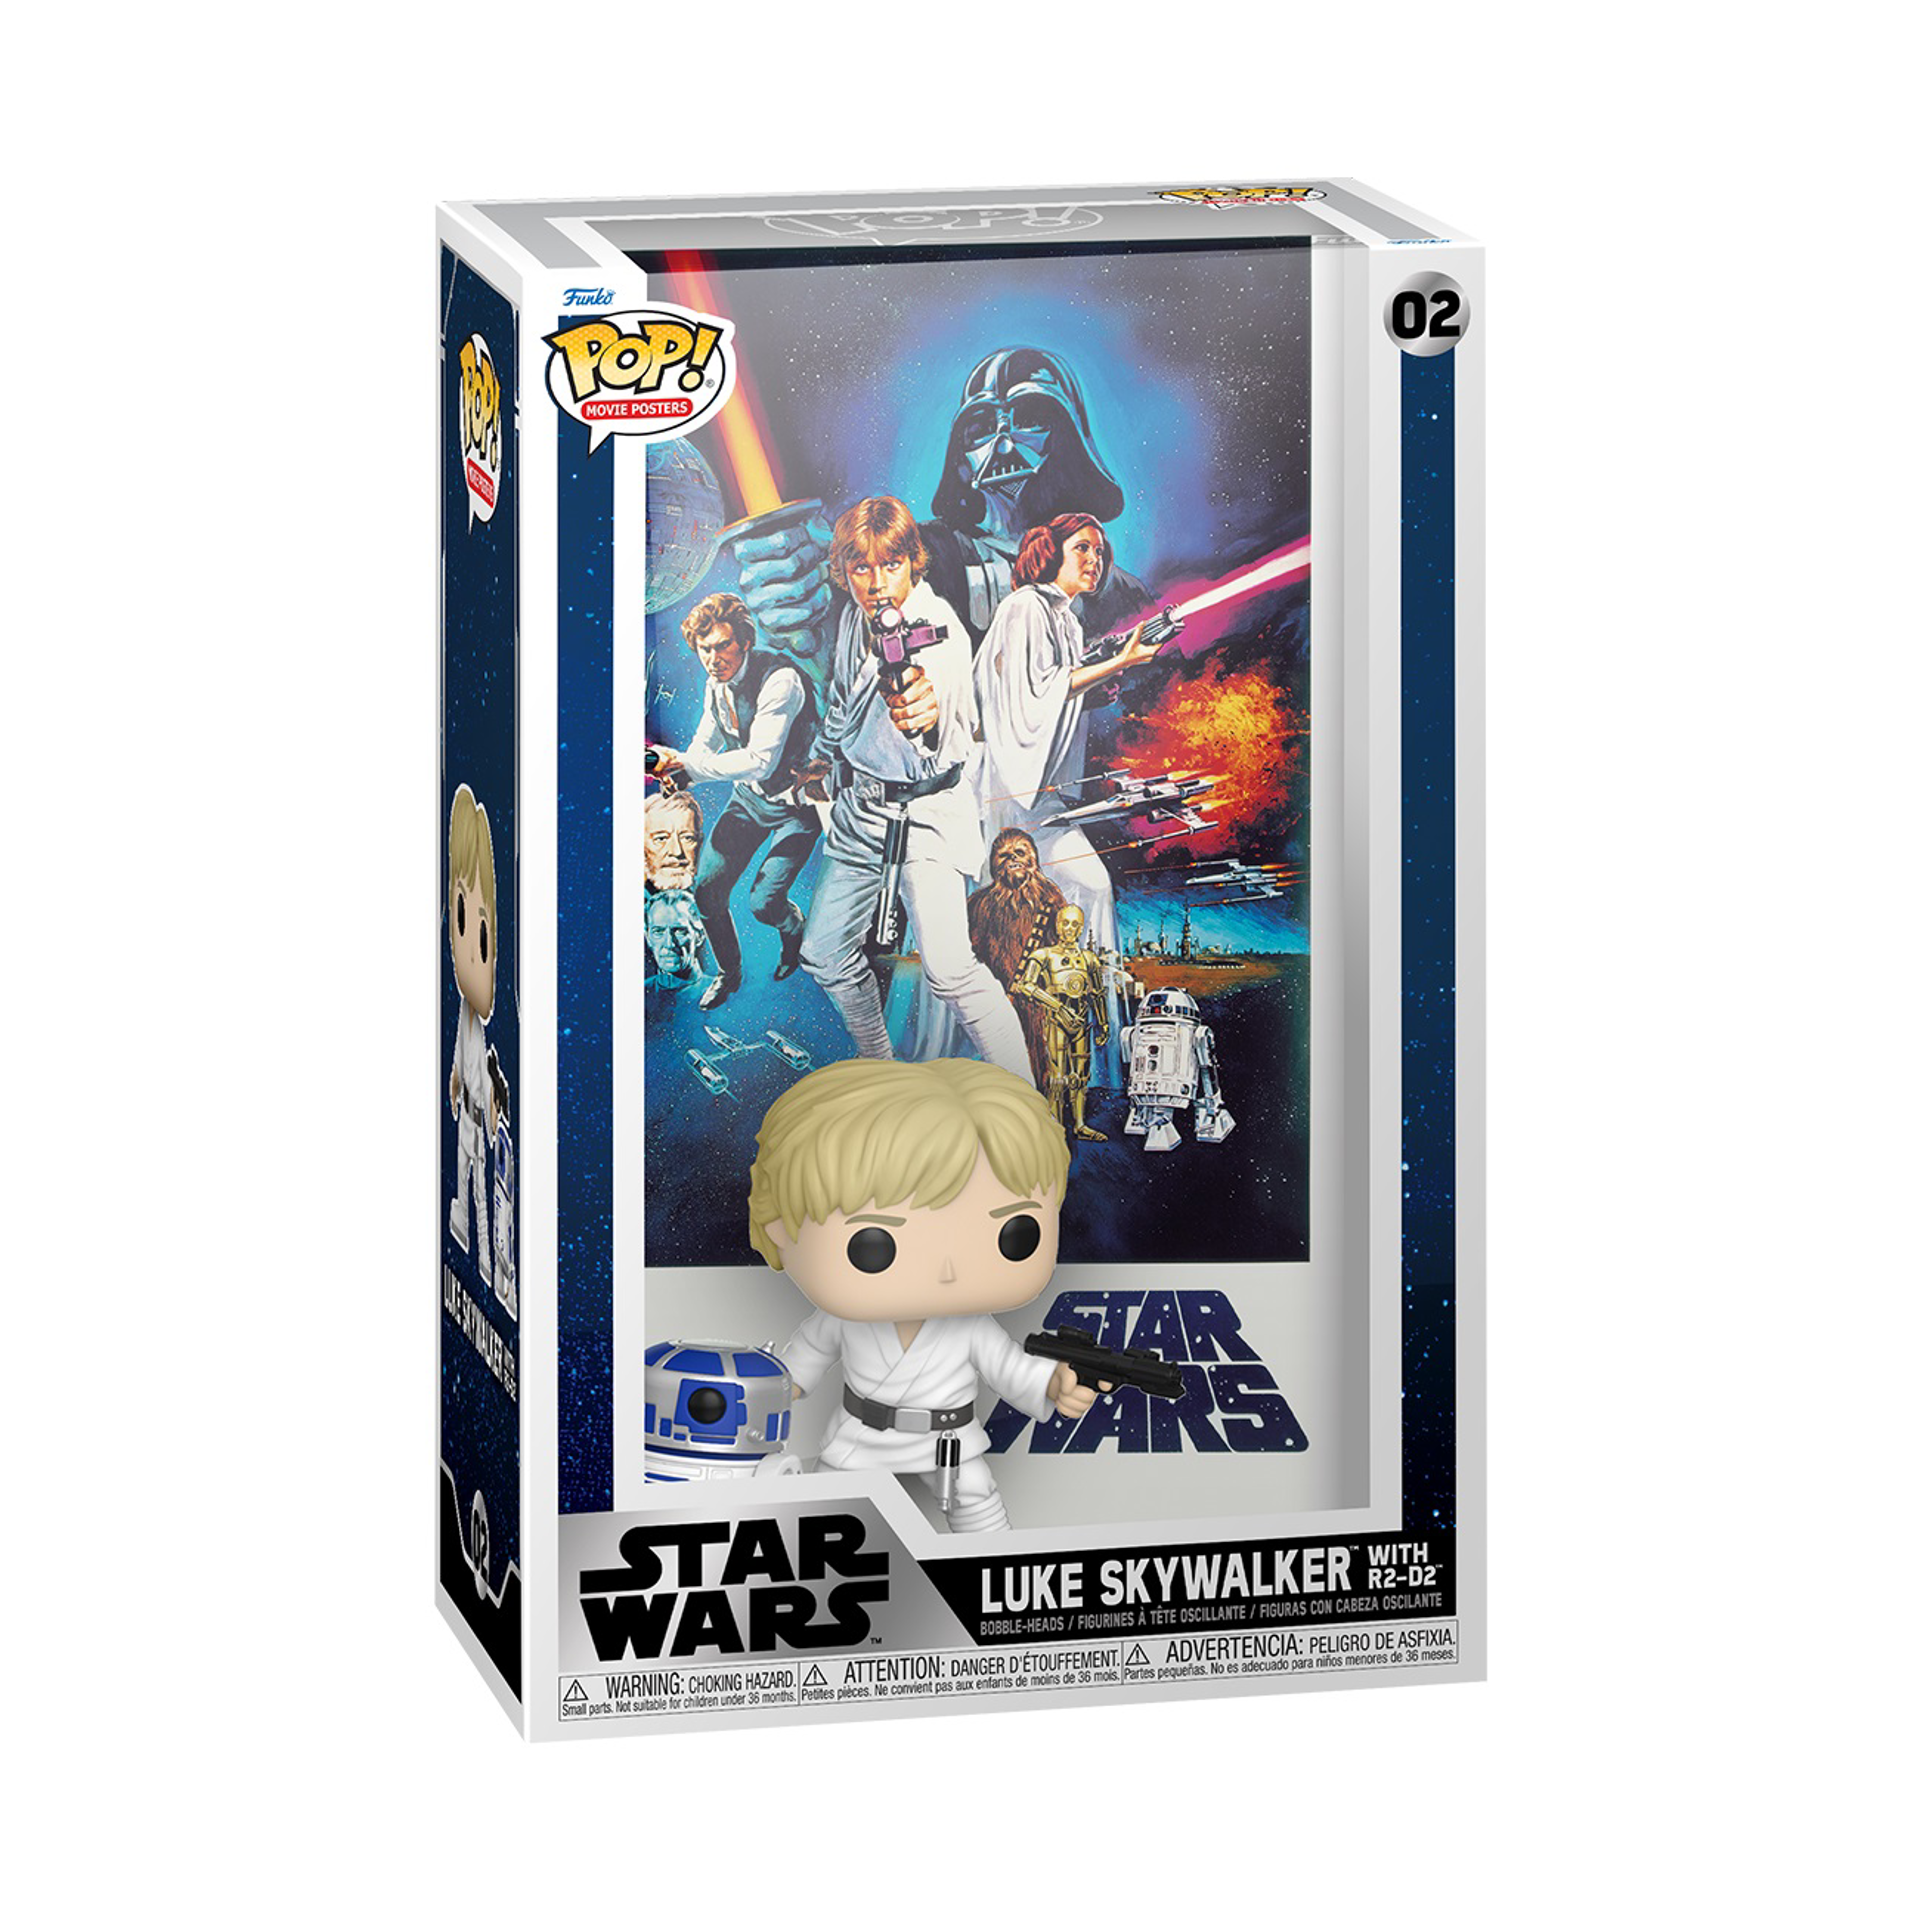 Funko Pop! Movie Poster Deluxe: Star Wars: Episode IV - A New Hope - Luke Skywalker with R2-D2